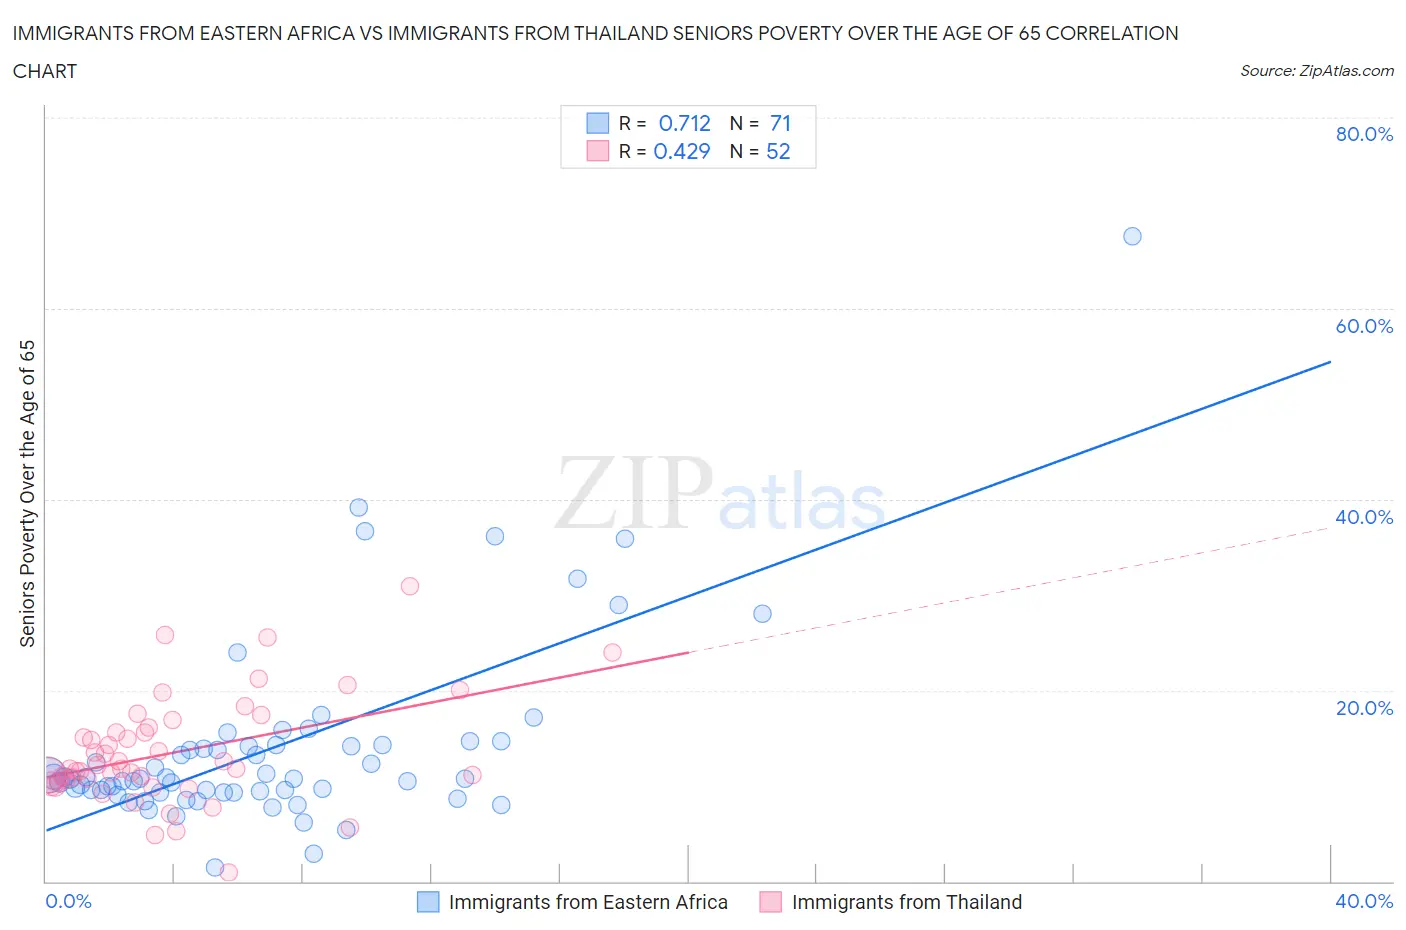 Immigrants from Eastern Africa vs Immigrants from Thailand Seniors Poverty Over the Age of 65